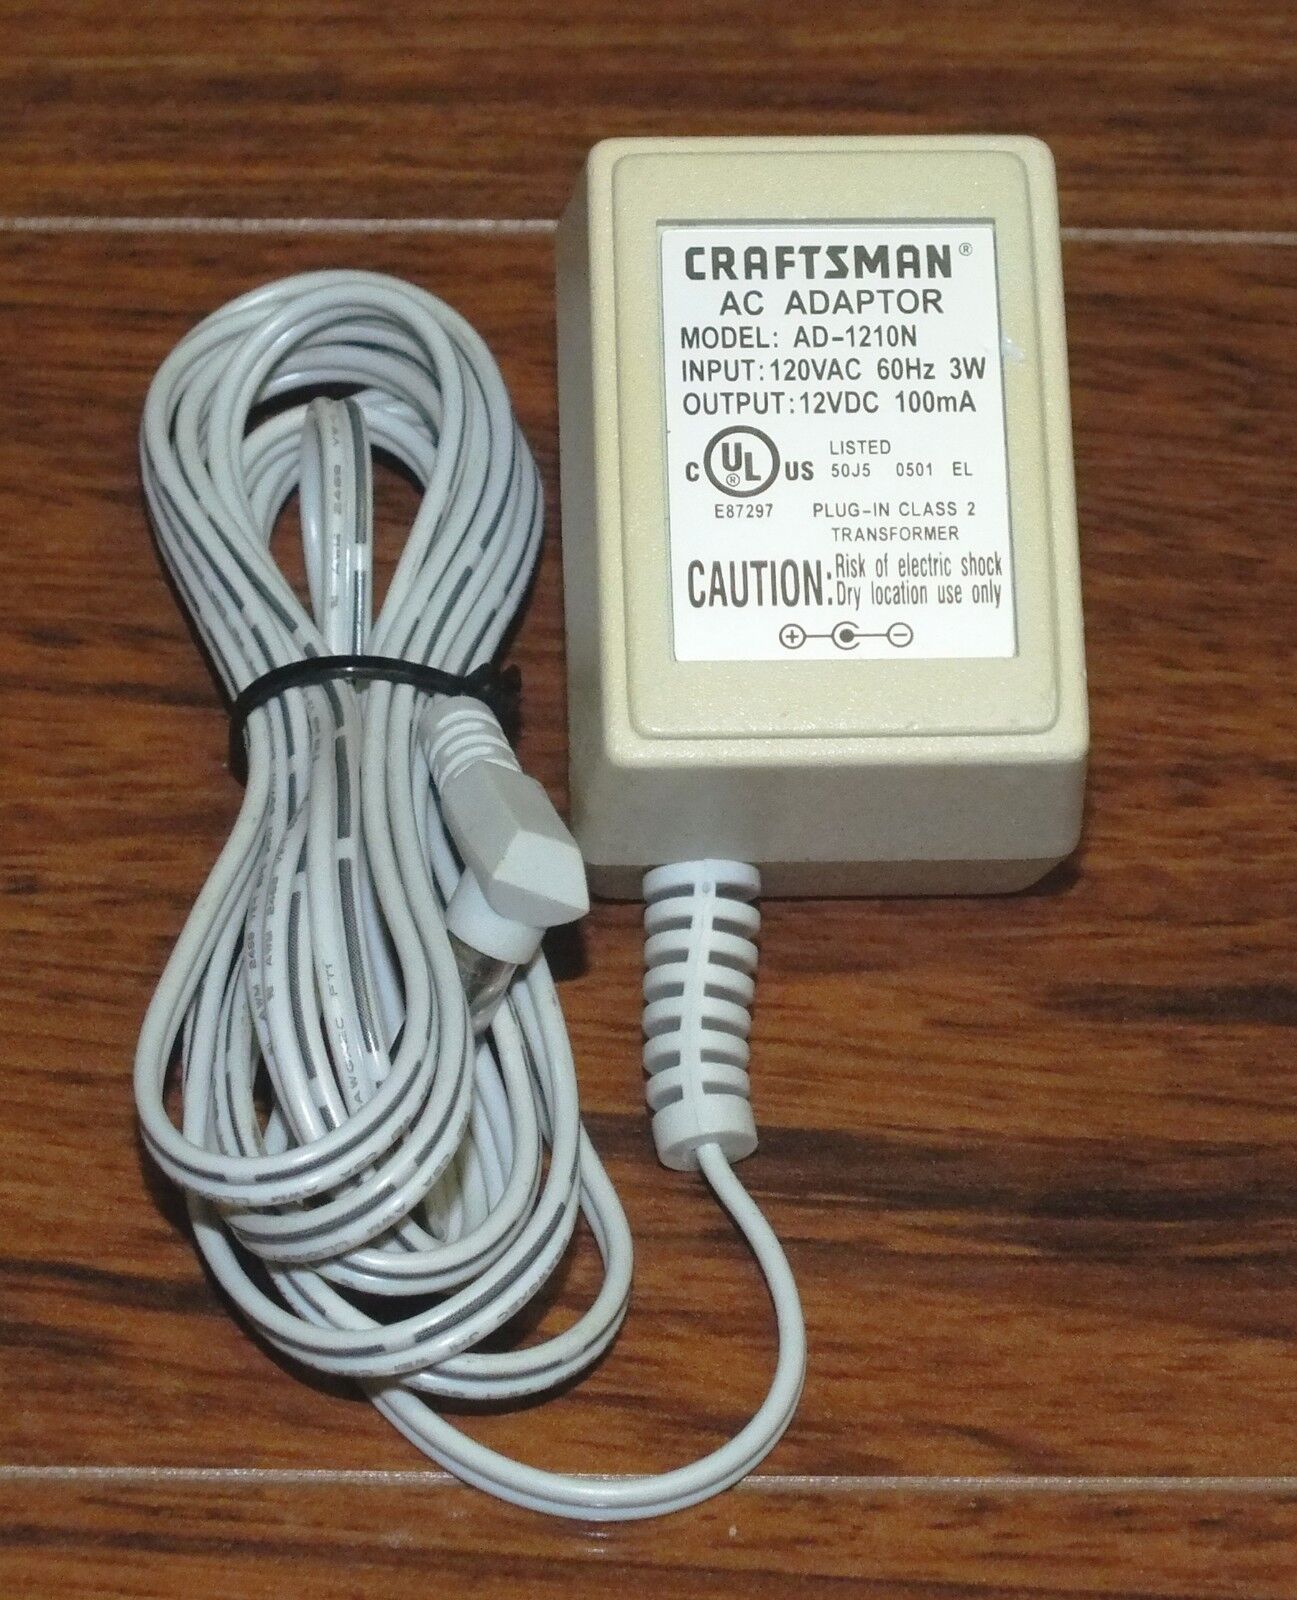 *Brand NEW*12VDC 100mA Craftsman AD-1210N AC DC ADAPTER POWER SUPPLY